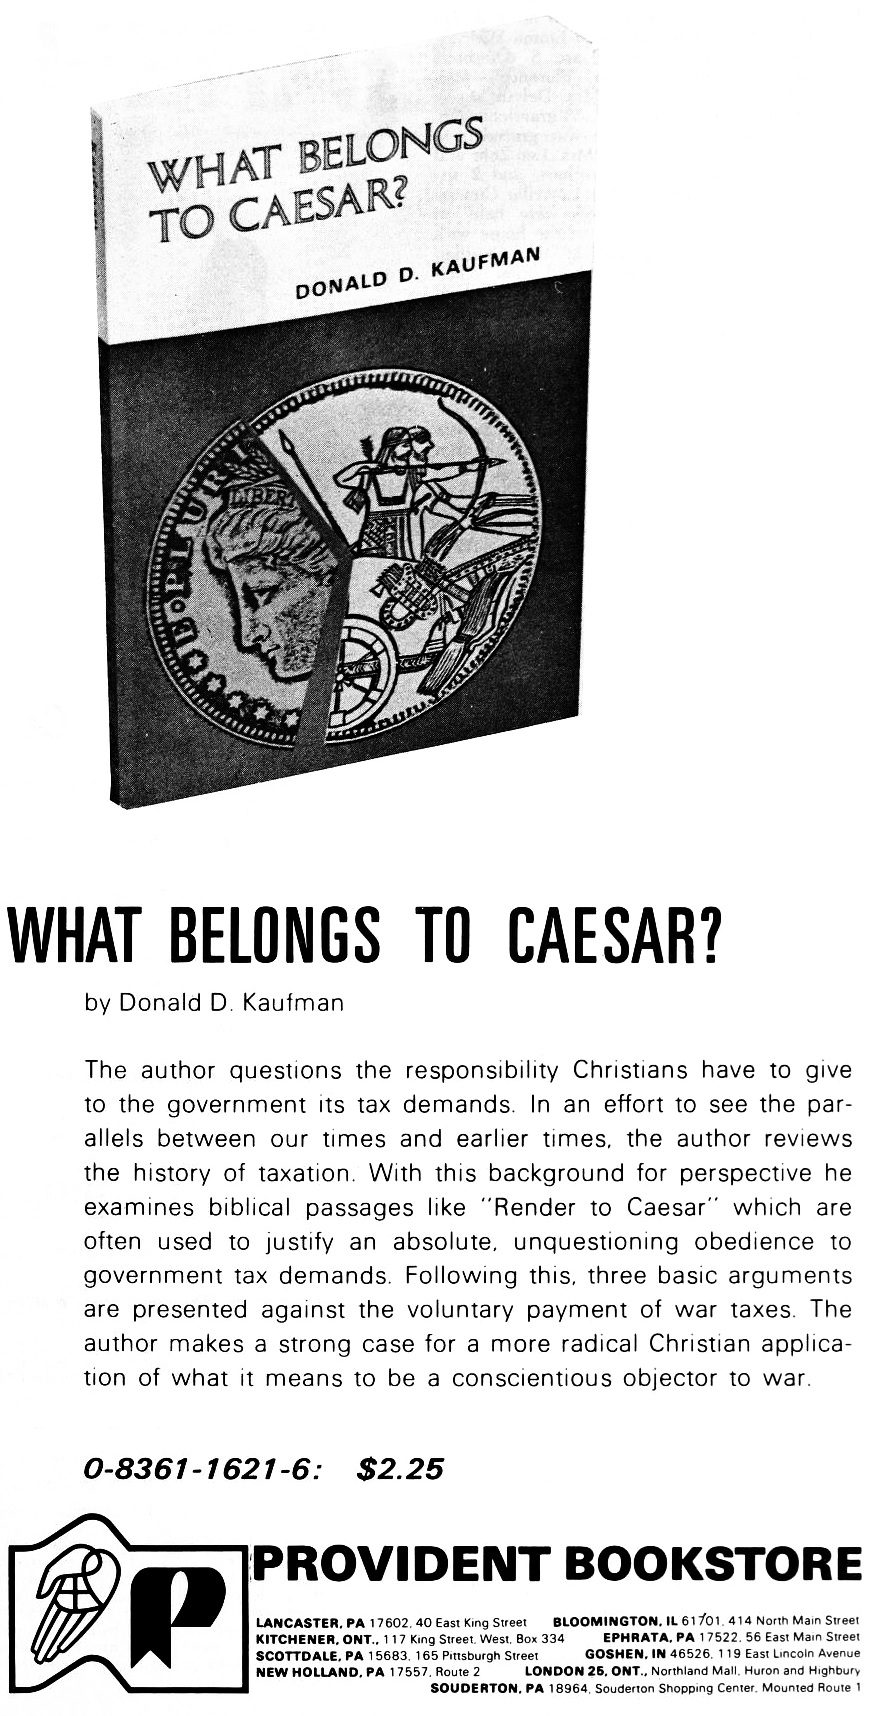 “What Belongs to Caesar?” by Donald D. Kaufman. The author questions the responsibility Christians have to give to the government its tax demands. In an effort to see the parallels between our times and earlier times, the author reviews the history of taxation. With this background for perspective he examines biblical passages like “Render to Caesar” which are often used to justify an absolute, unquestioning obedience to government tax demands. Following this, three basic arguments are presented against the voluntary payment of war taxes. The author makes a strong case for a more radical Christian application of what it means to be a conscientious objector to war.